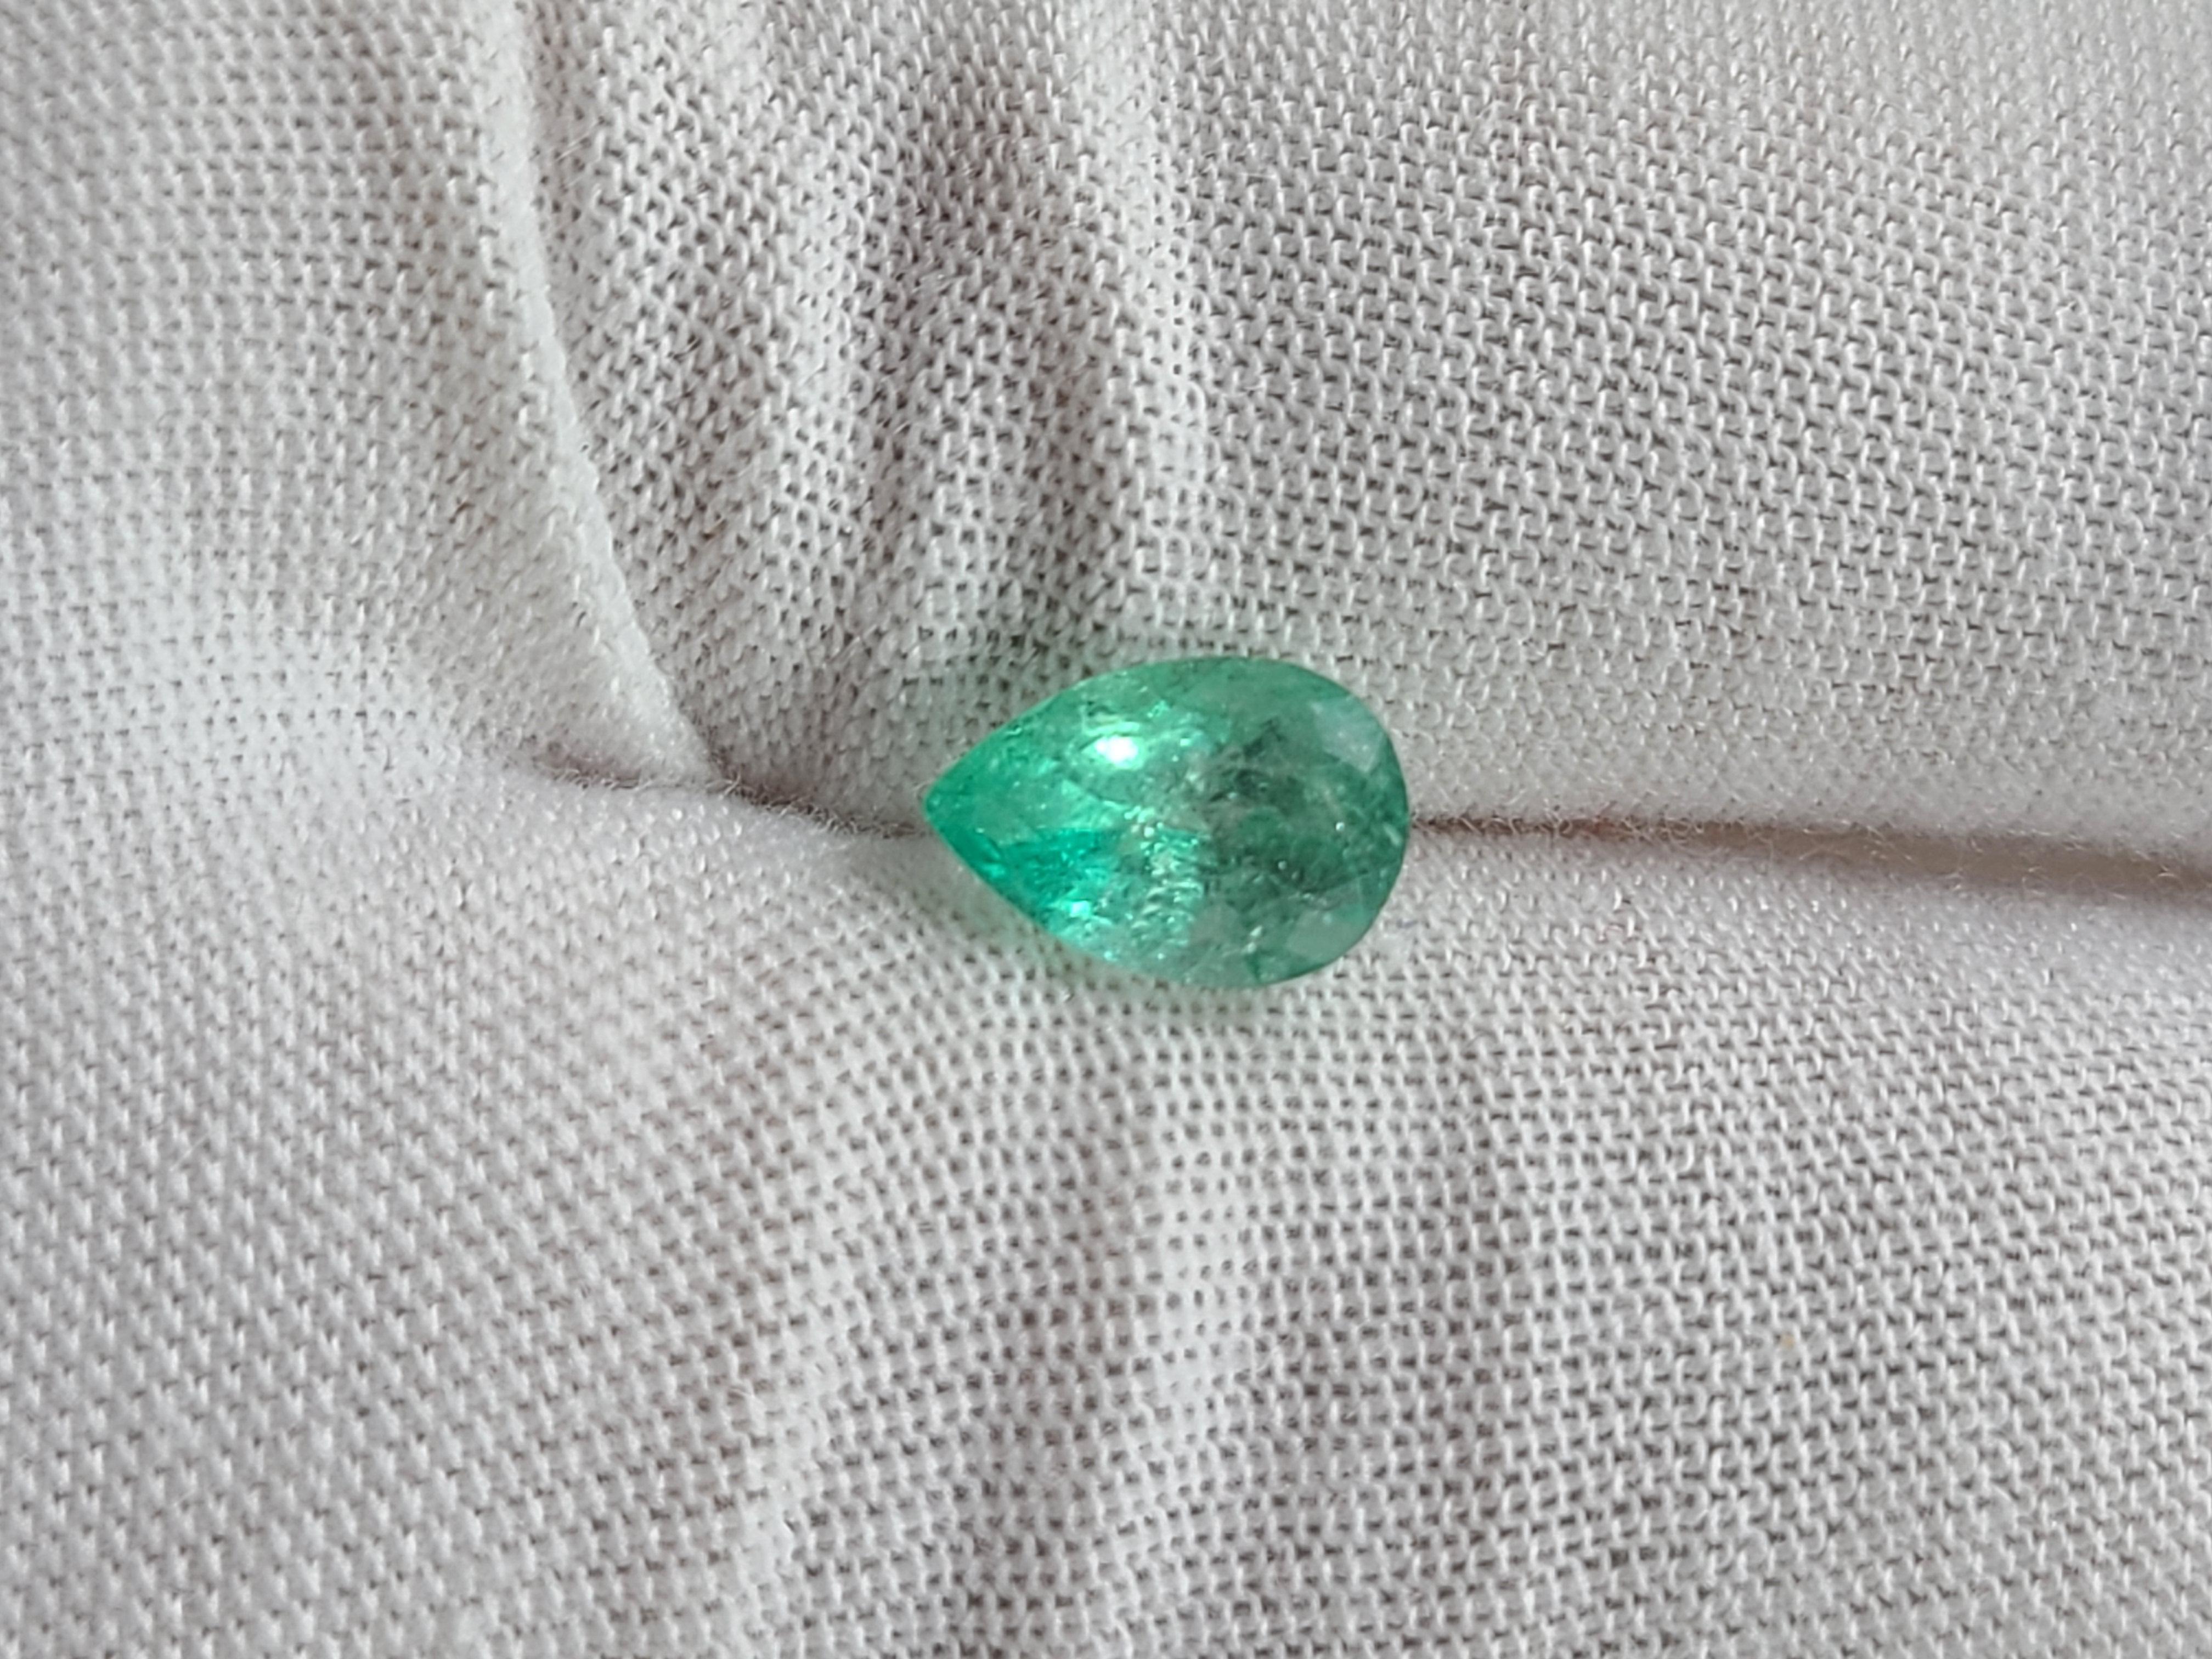 This gemstone comes from the estate of a private collector.
It's a Columbian Emerald and weighs 1.25ct. It's 9x6mm pear shaped with a 4.5mm depth.
